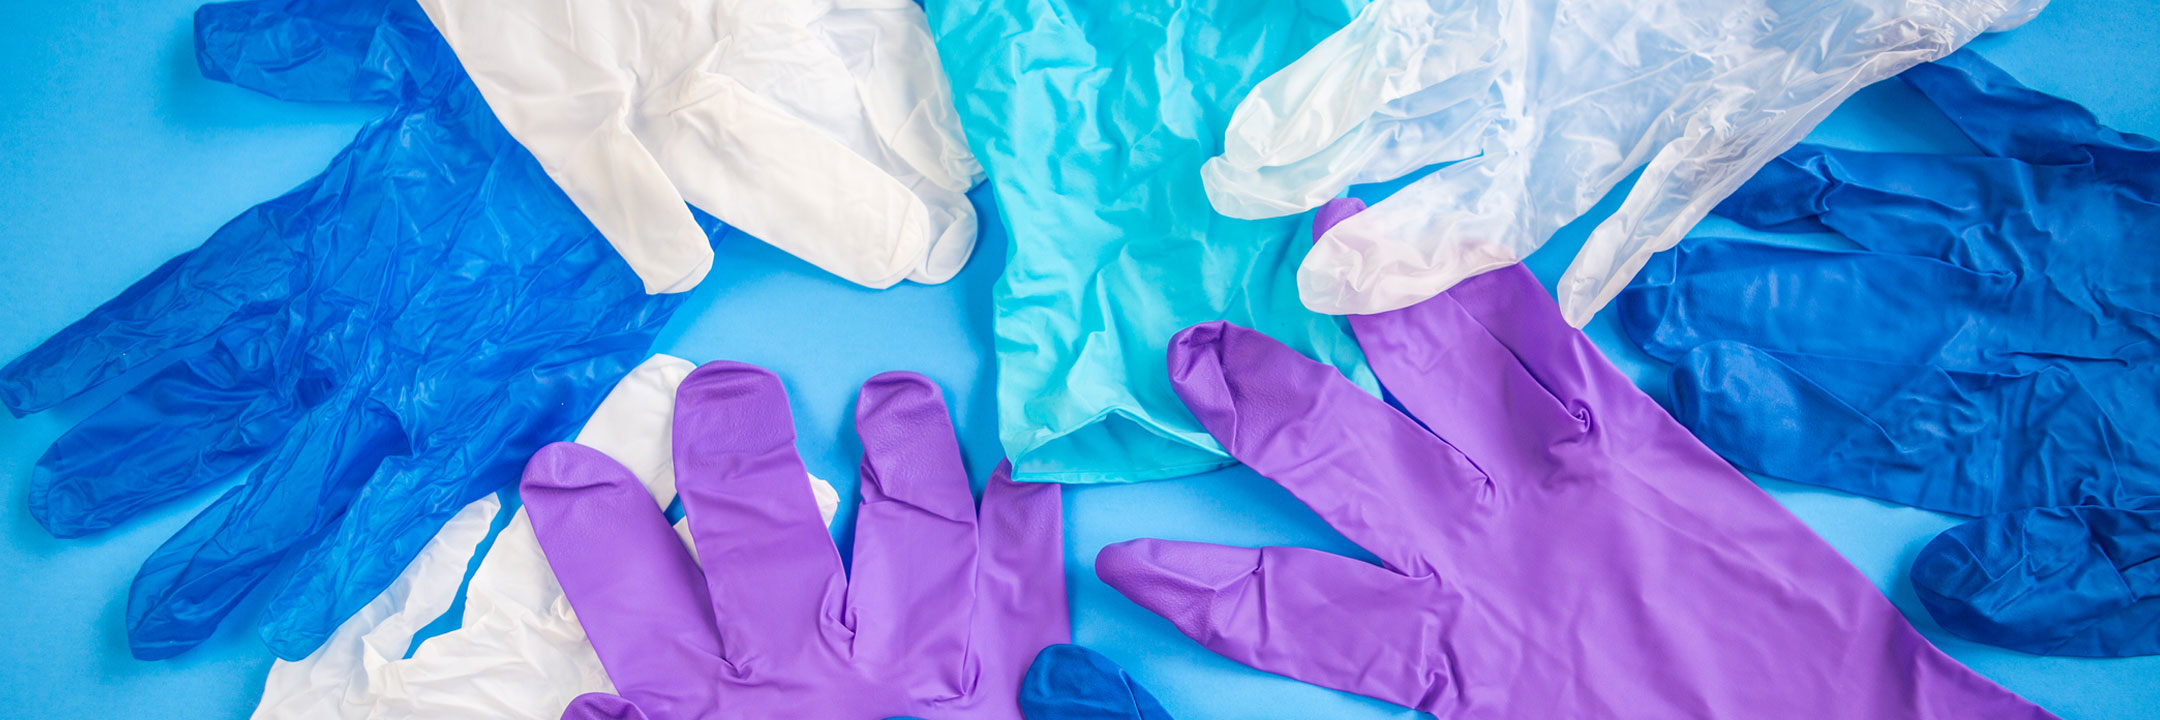 Assorted colored disposable gloves spread out on a blue surface